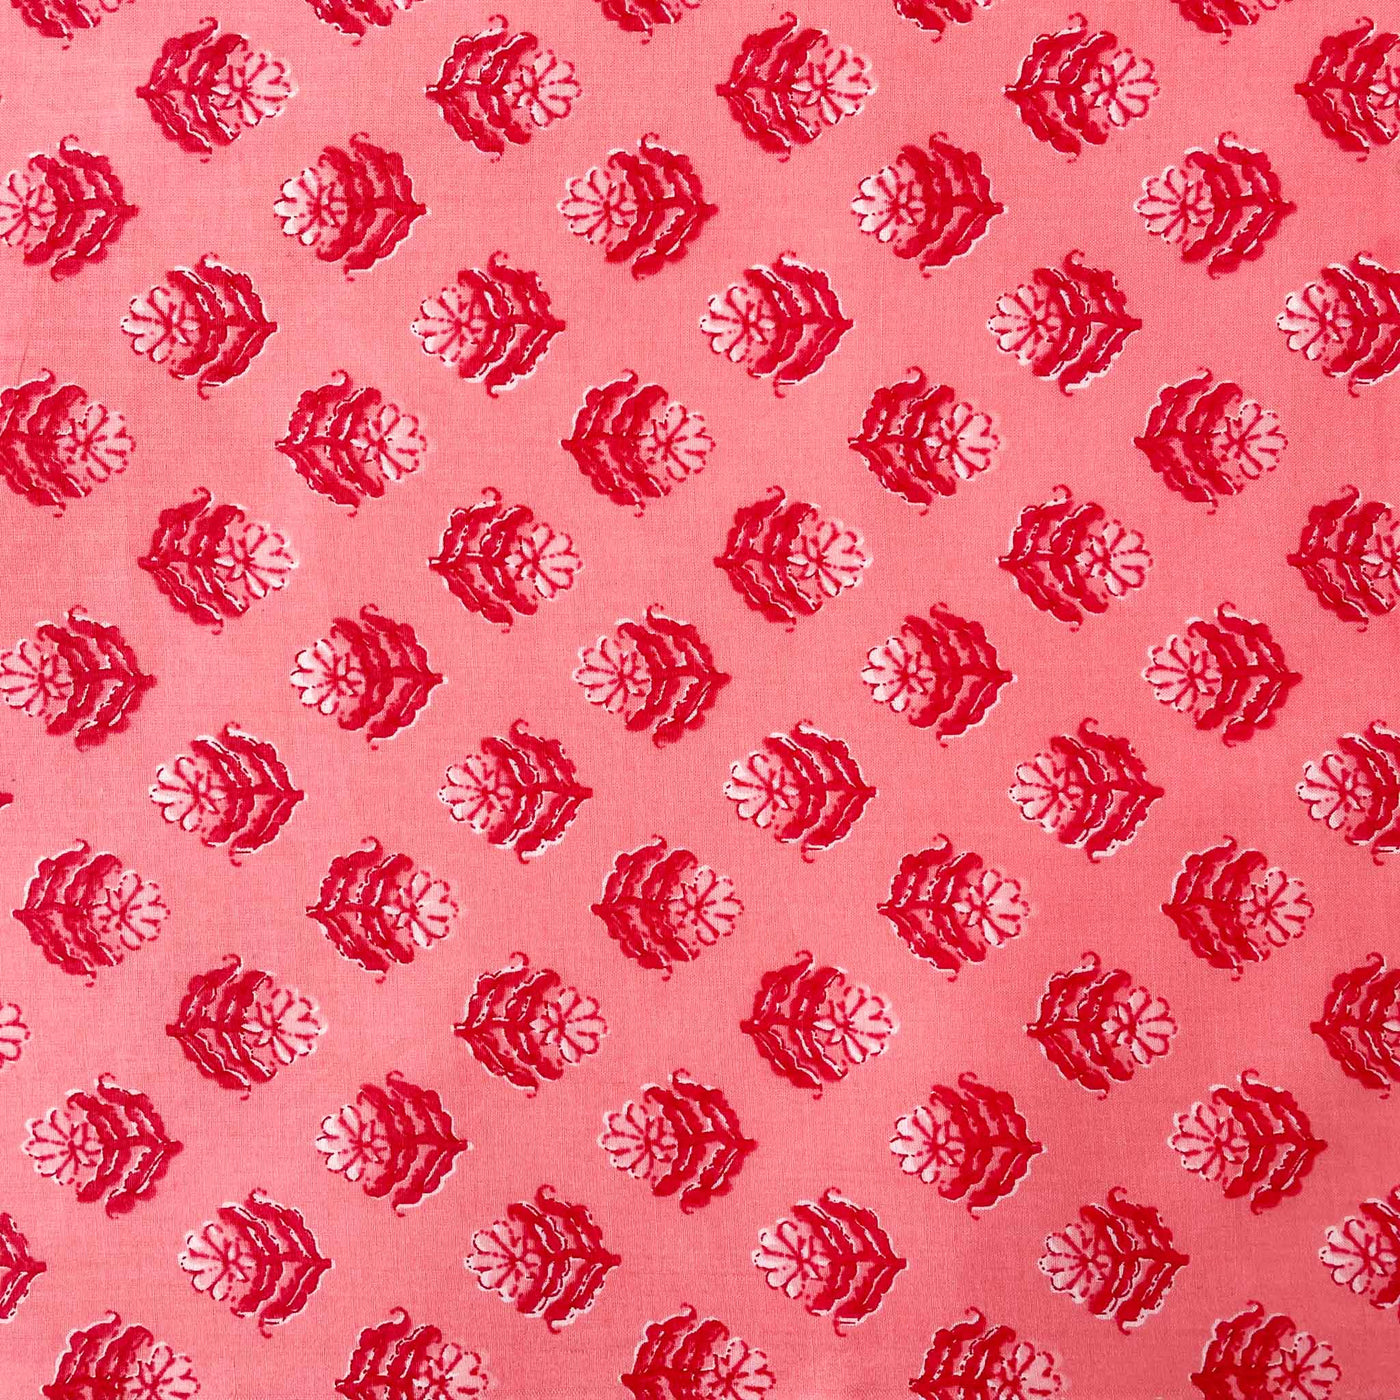 Fabric Pandit Fabric Peach Monochrome Floral Pattern Screen Printed Pure Cotton Fabric (Width 43 inches)